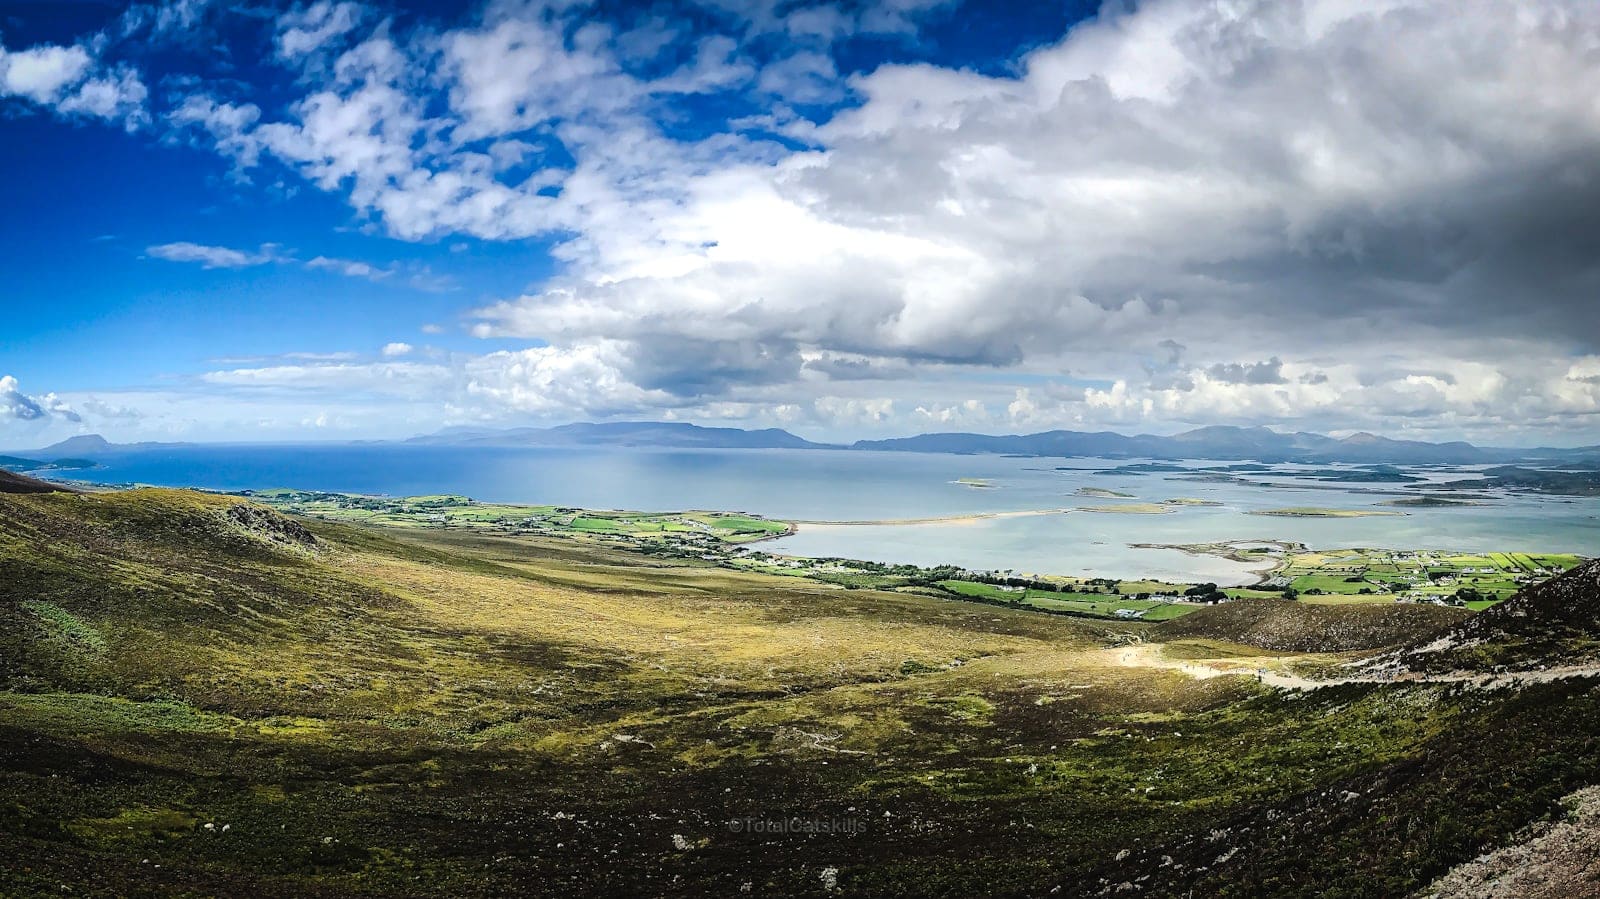 Clew Bay, seen fro Croagh Patrick